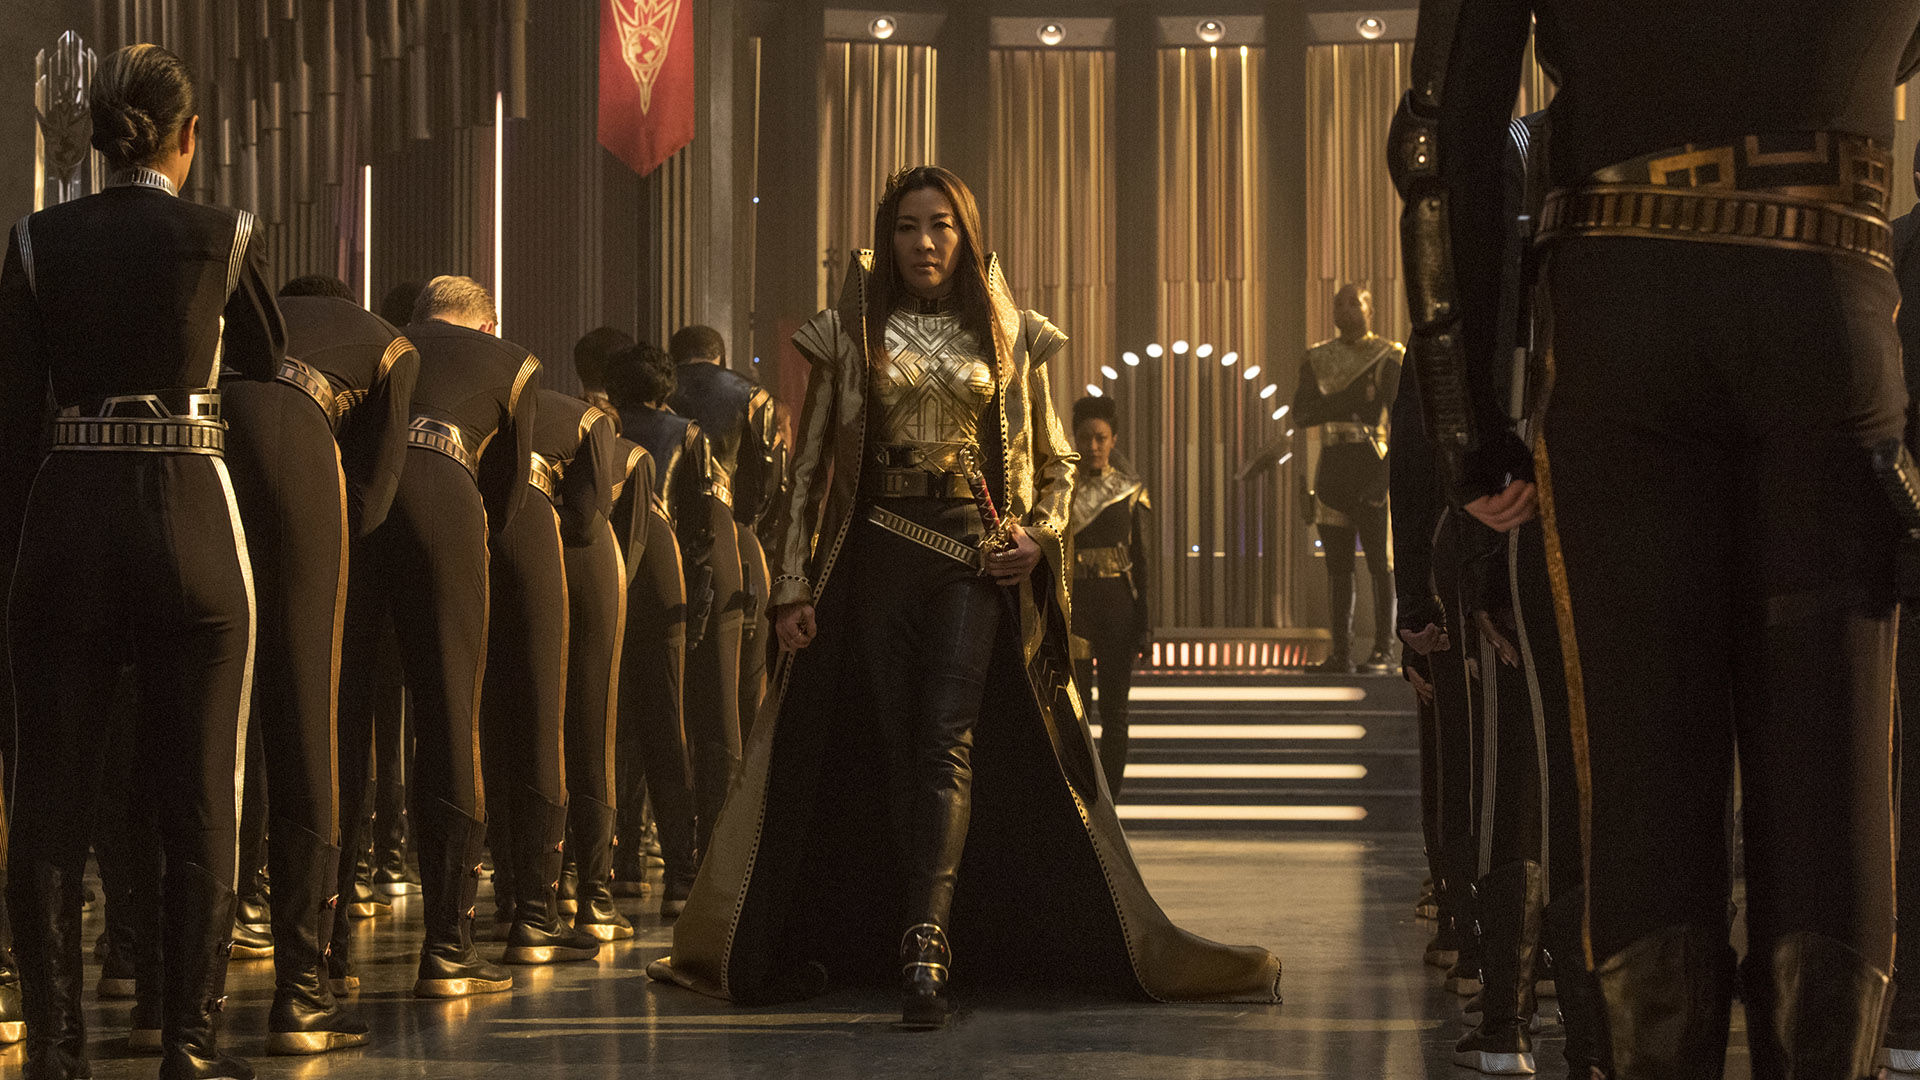 Michelle Yeoh as Cpt. Philippa Georgiou in Star Trek: Discovery